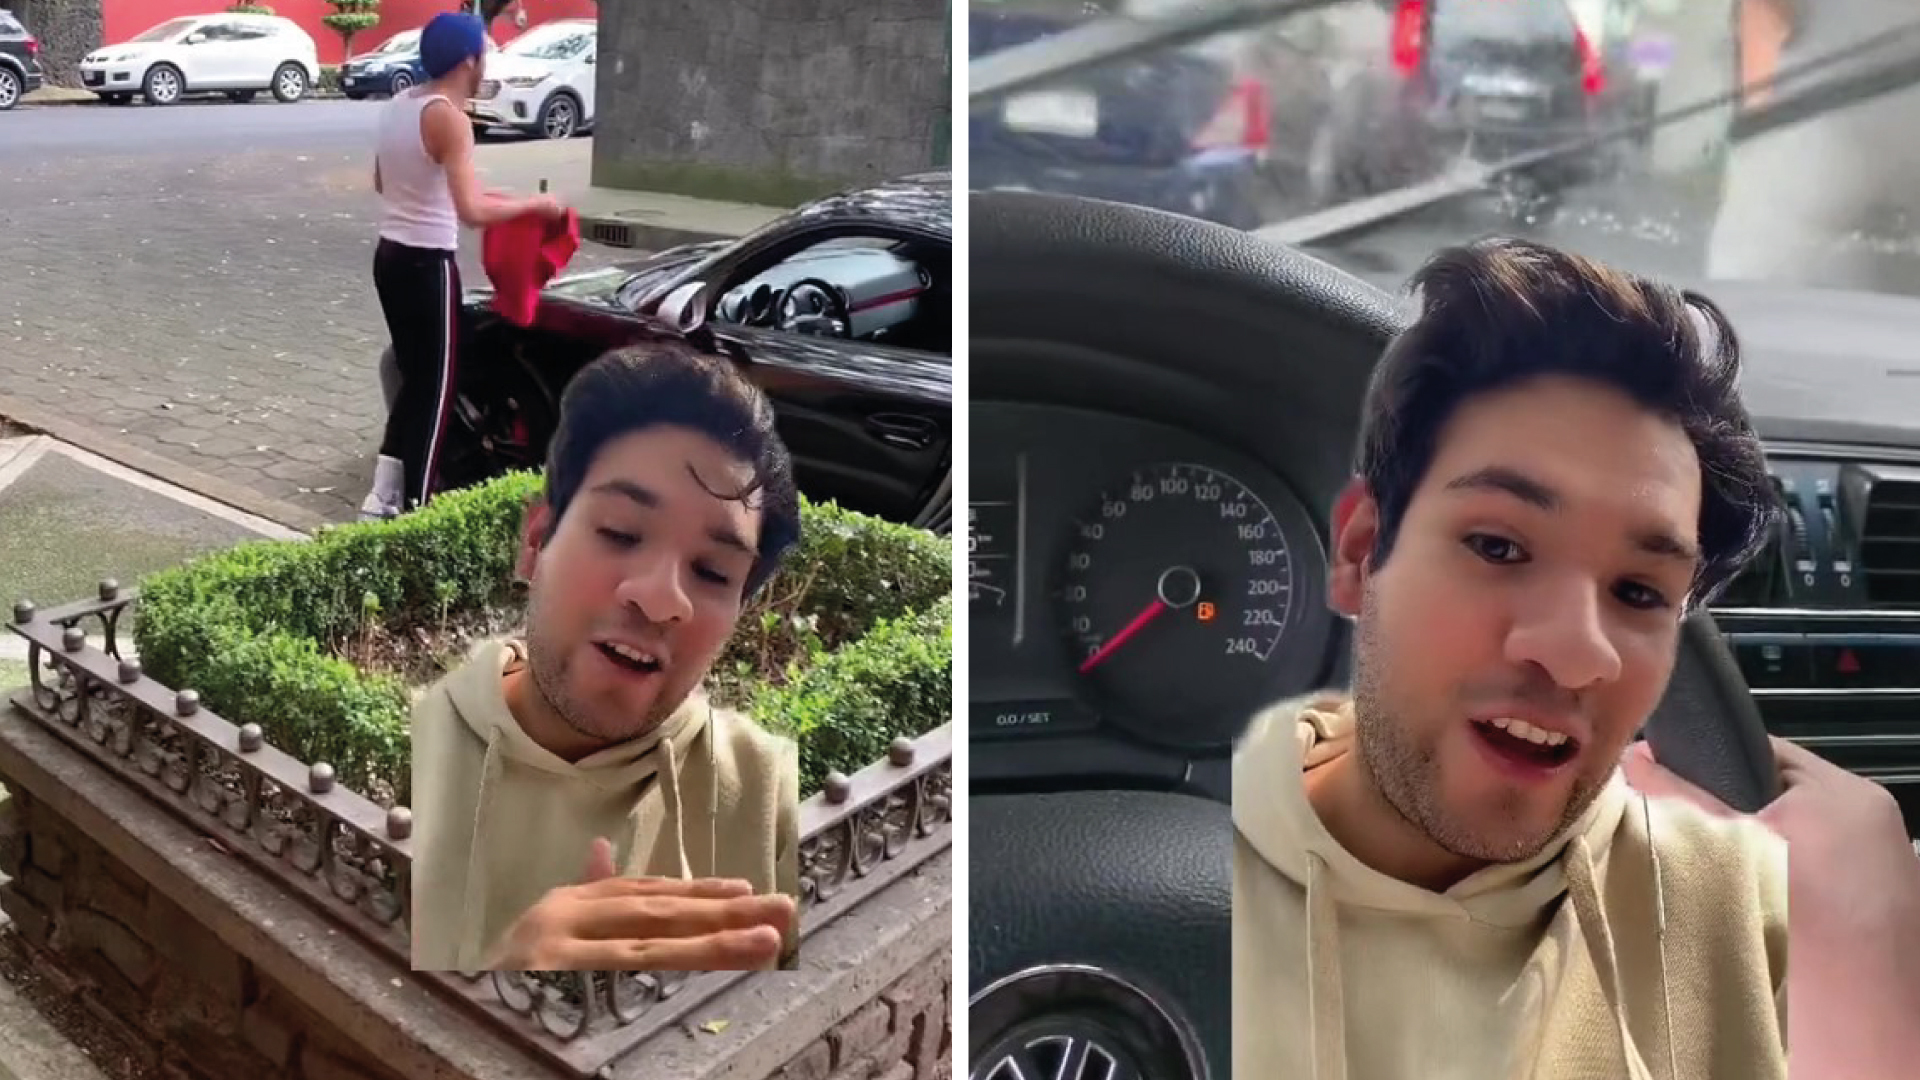 He taught a technique to avoid window cleaners and received some negative feedback.  (TikTok: @maxort)